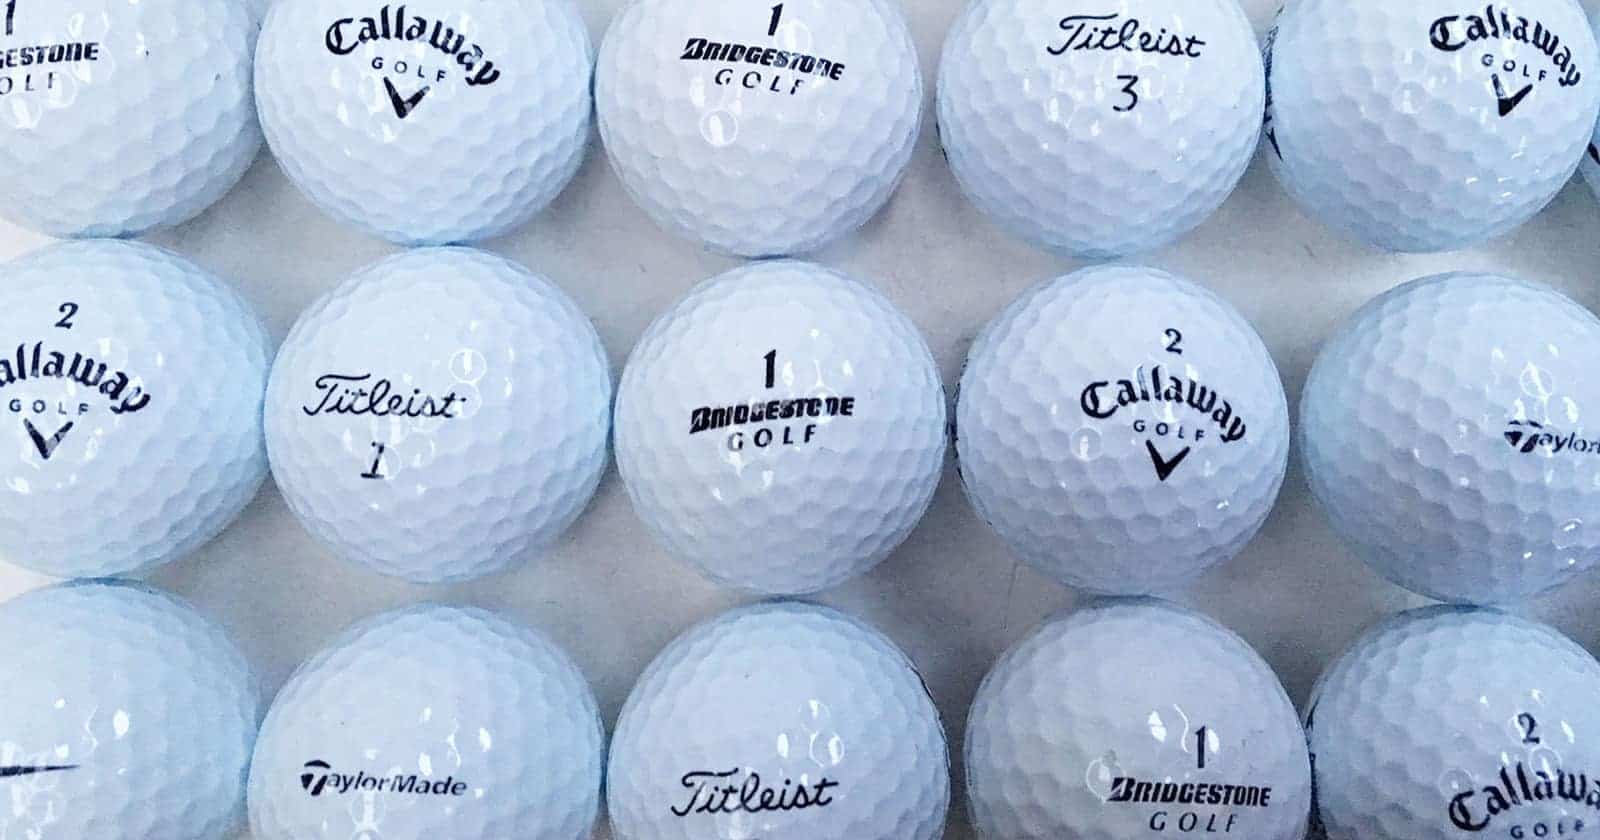 What Do the Numbers on Golf Balls Mean? - Kansas Golf